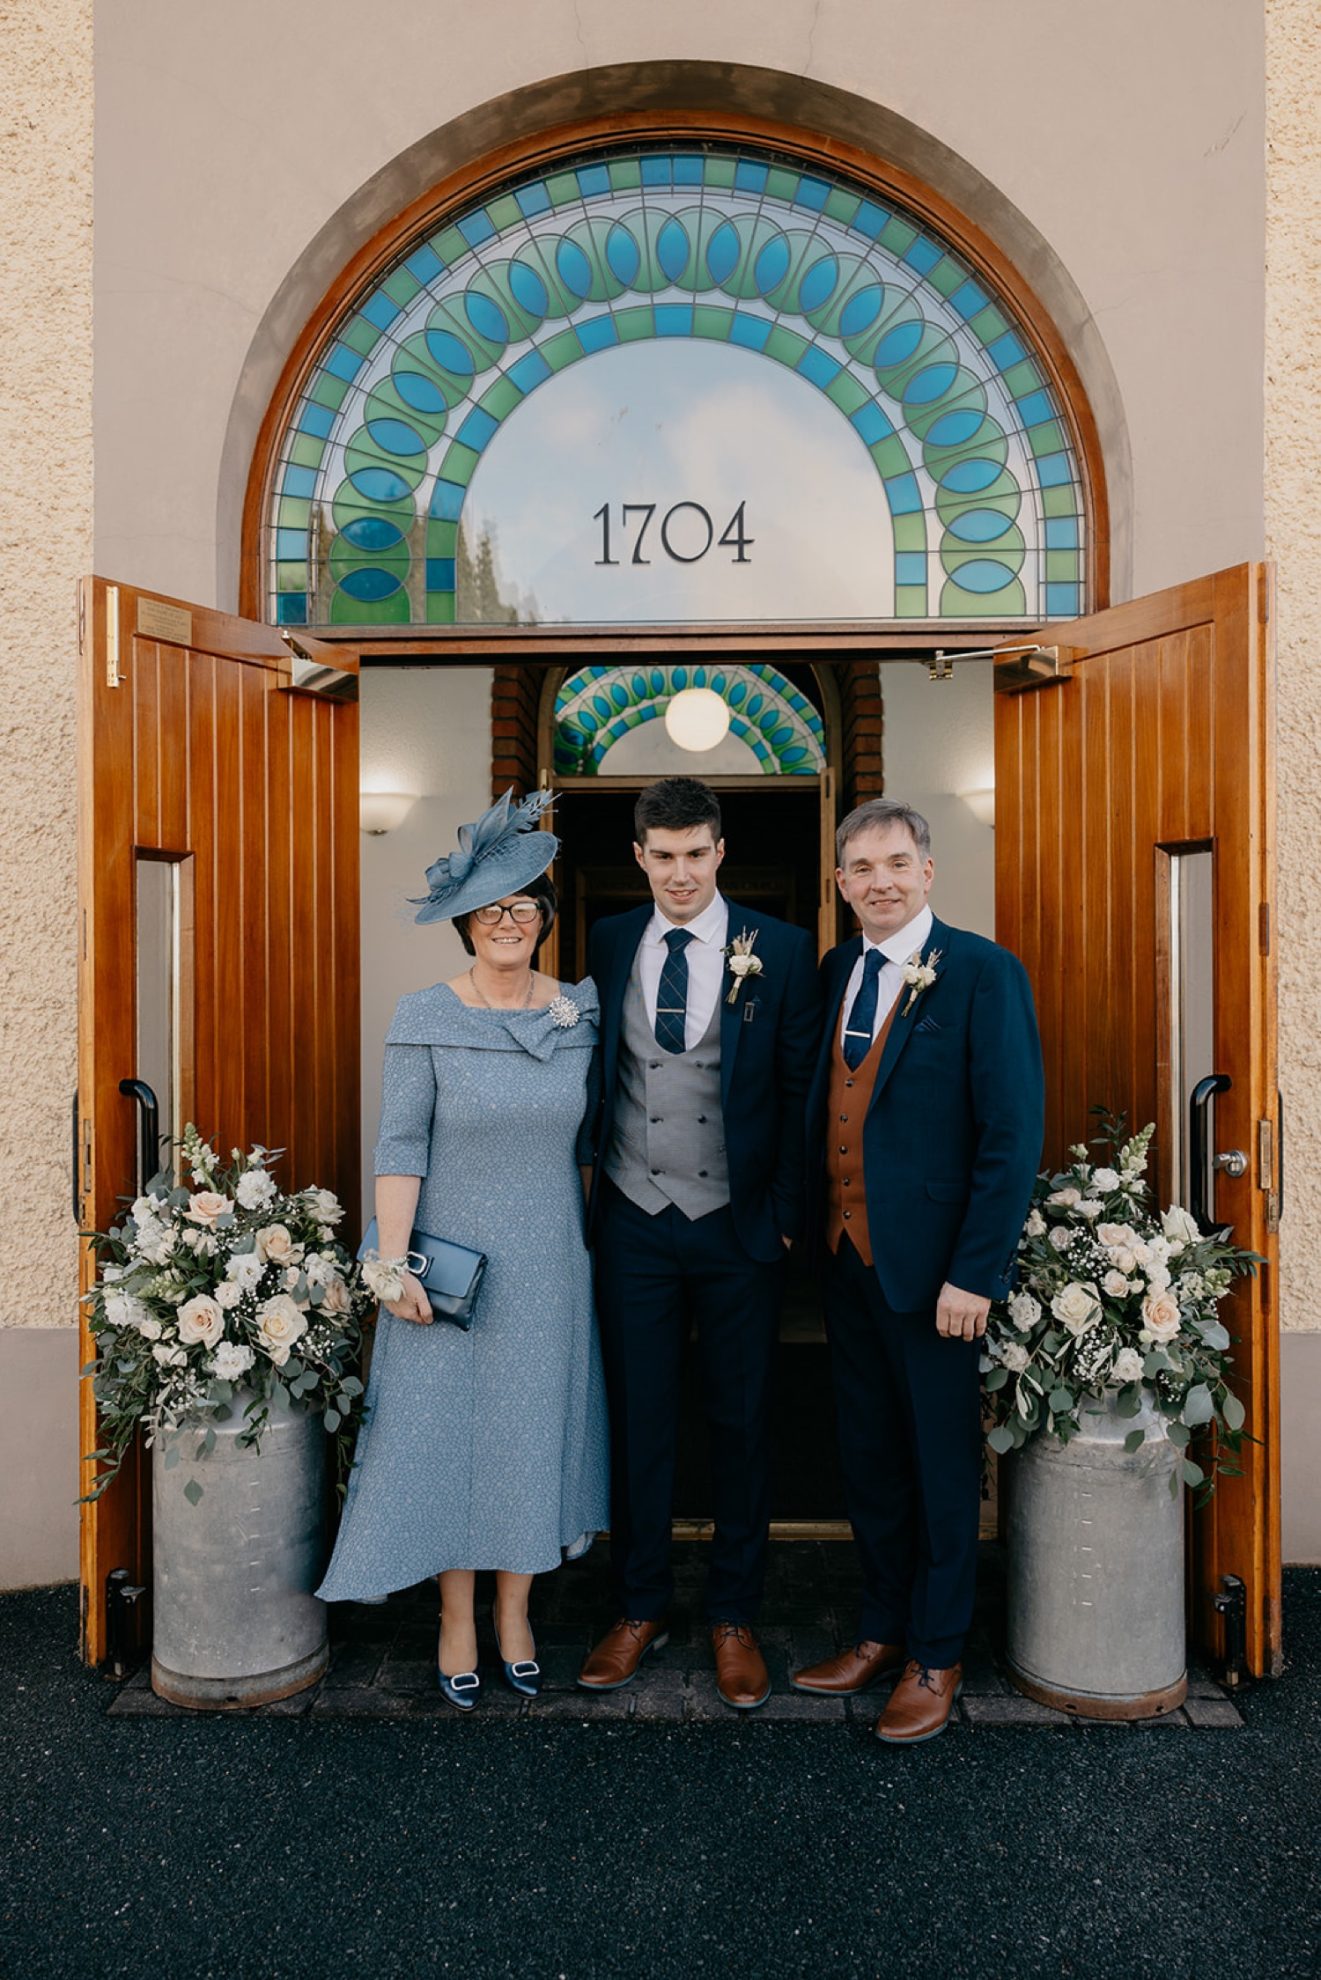 Ian with his parents on his wedding day